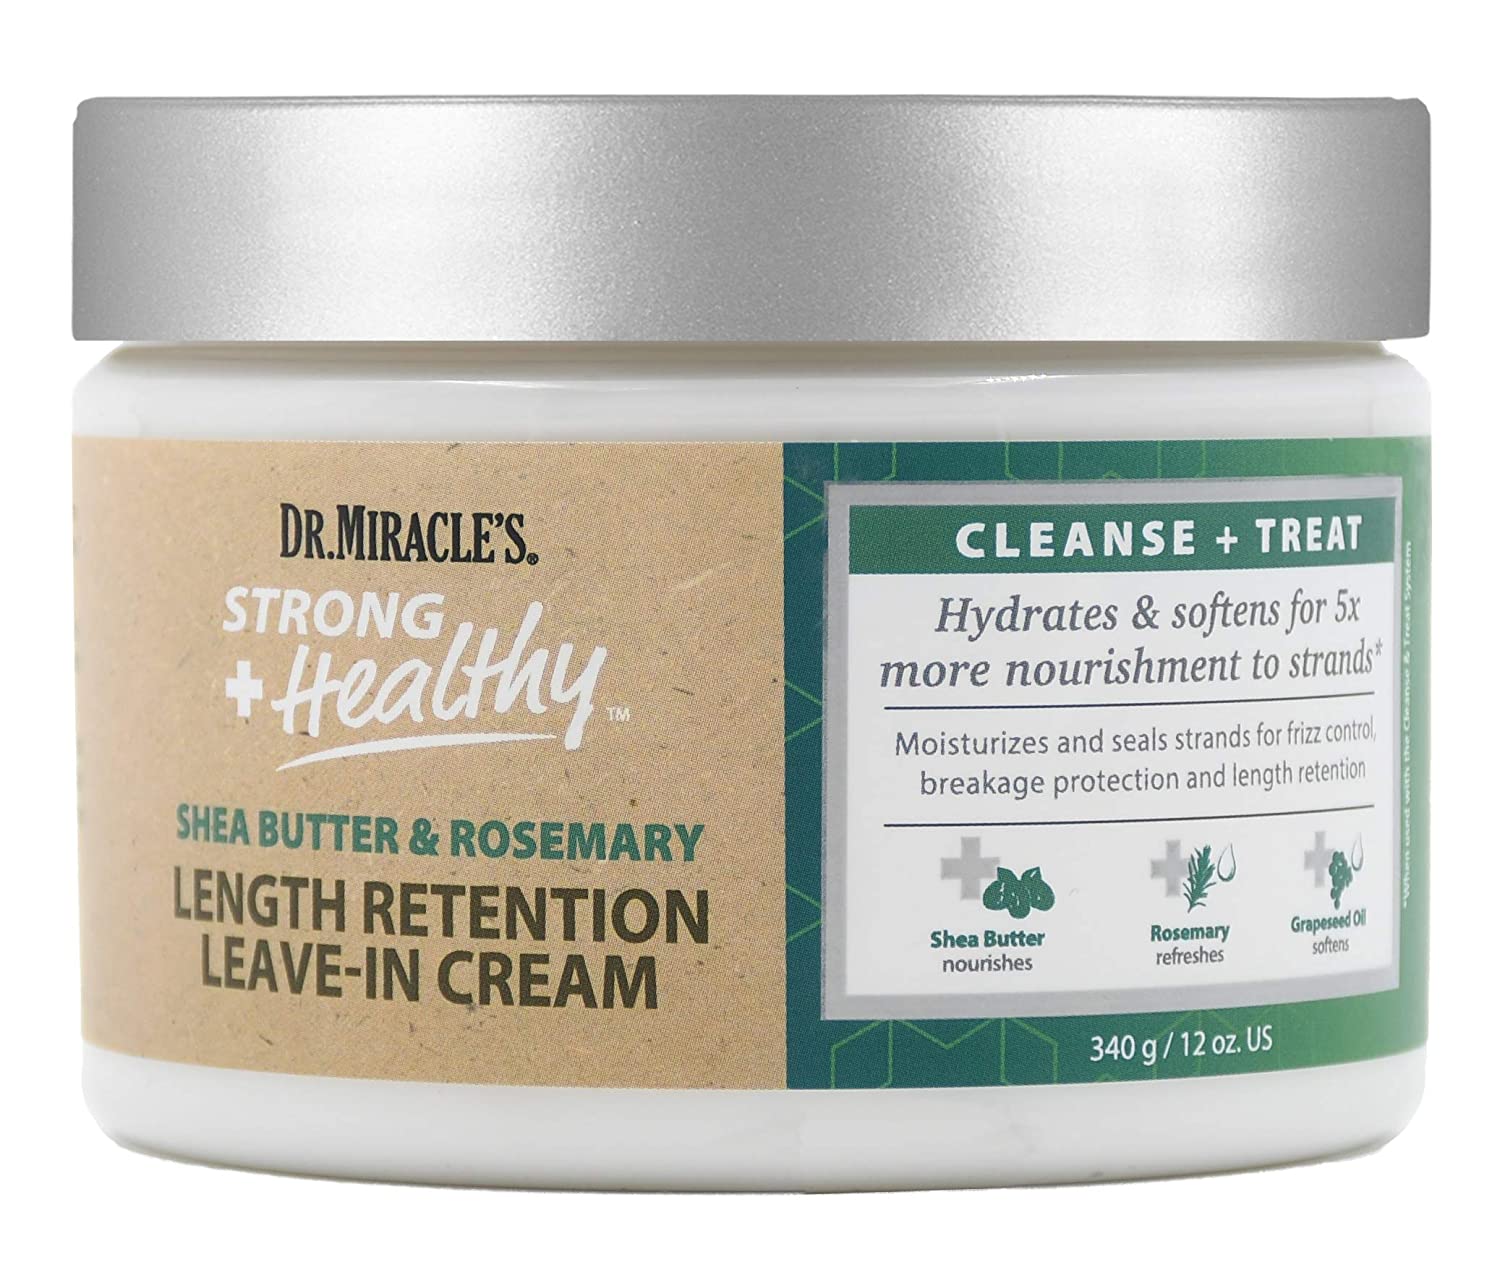 DR. MIRACLE'S STRONG & HEALTHY LENGTH RETENTION LEAVE-IN CREAM- 12 OZ